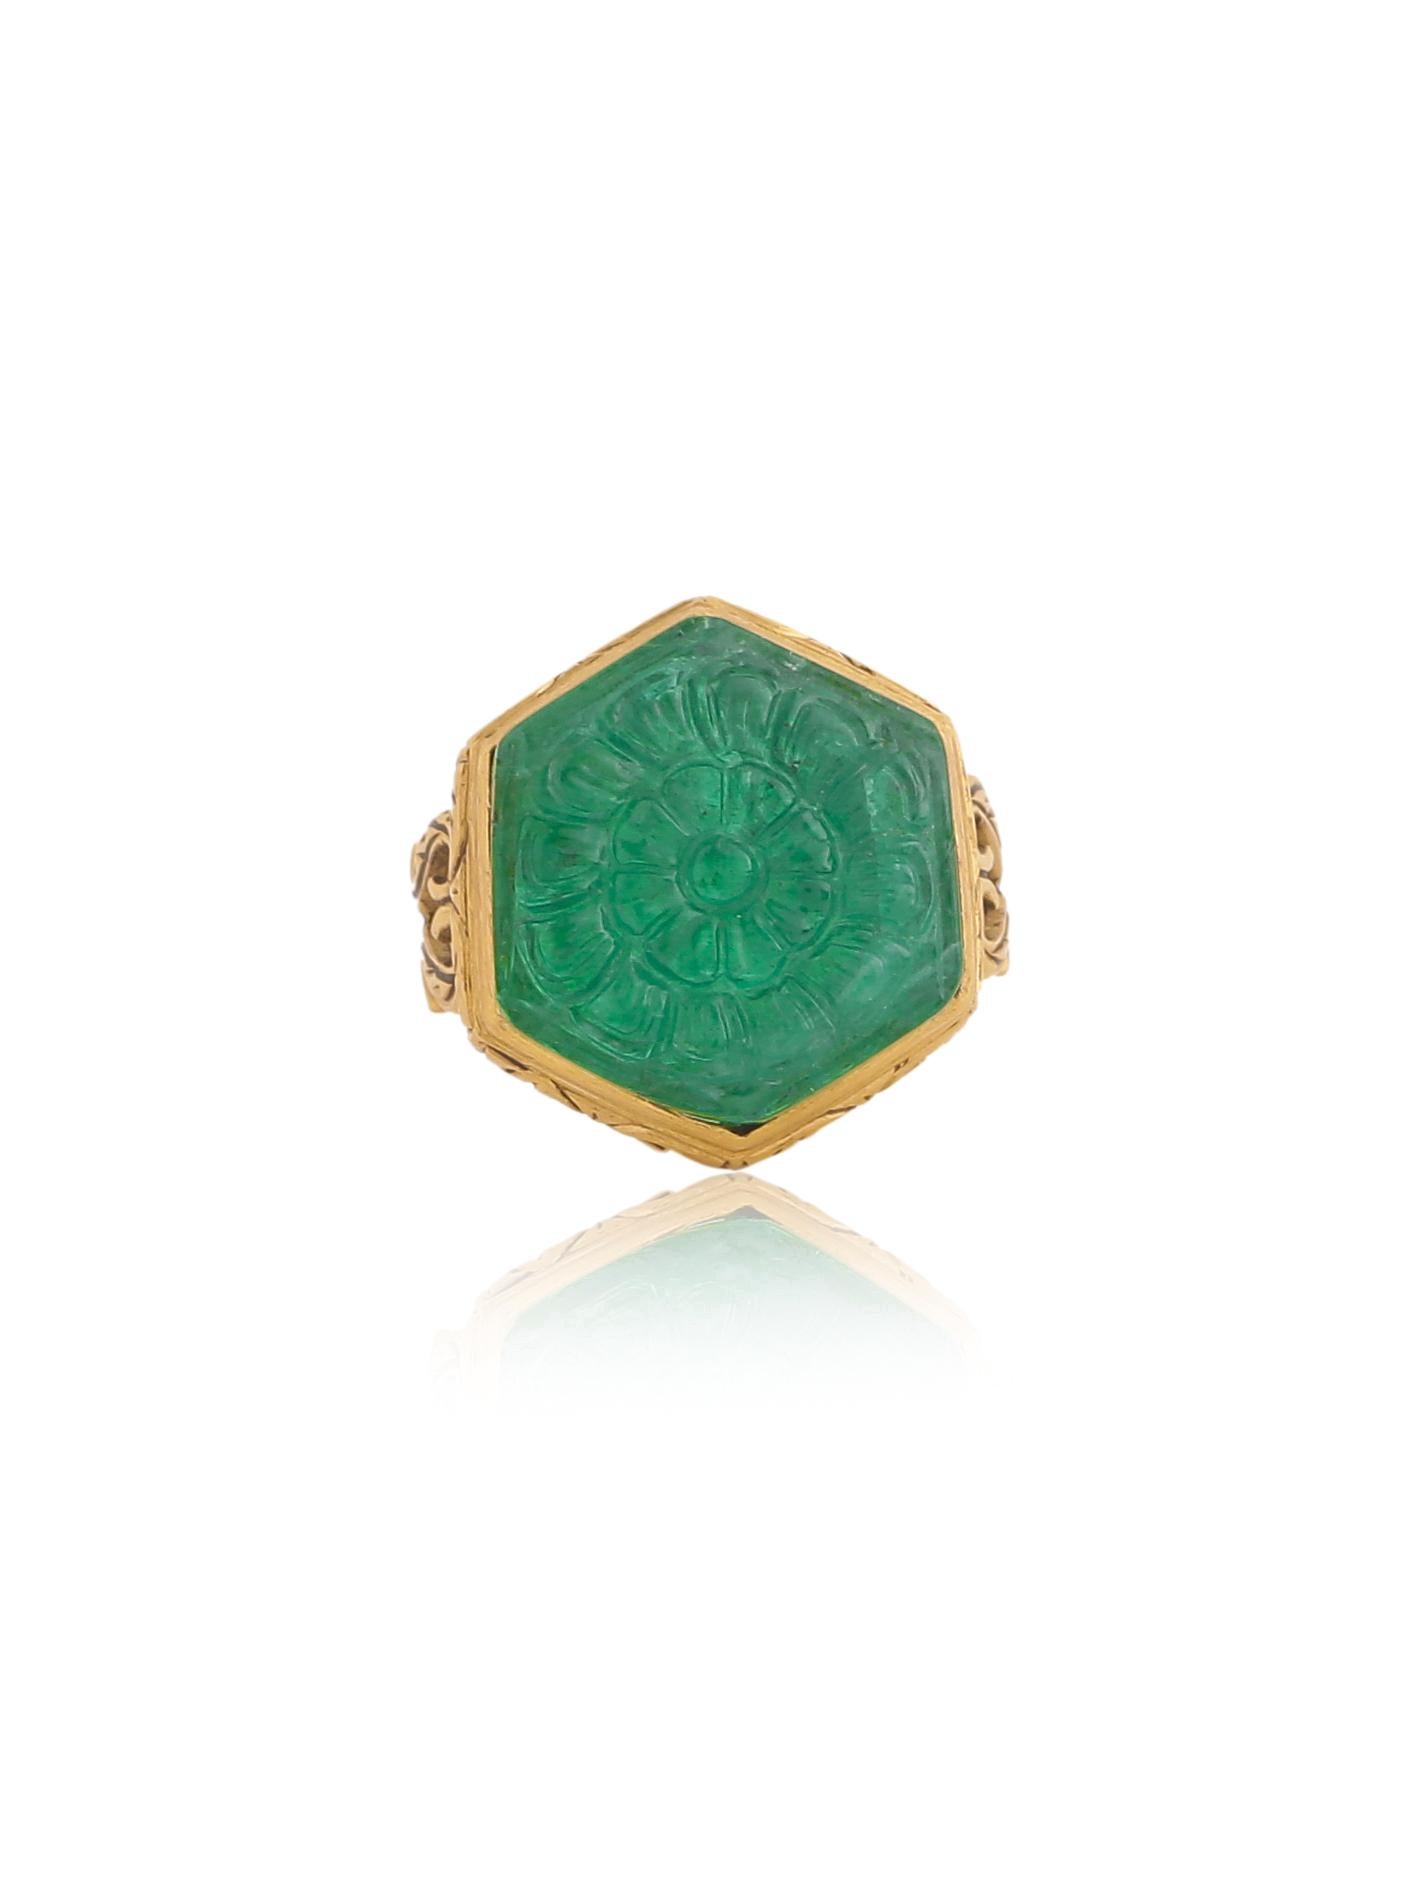 A beautiful Carved Natural Zambian Emerald set in a ring with 18 karat Gold. You will notice really fine intricate work done on gold throughout the ring. The work and the whole piece is handcrafted by our highly trained artisans. The Emerald is